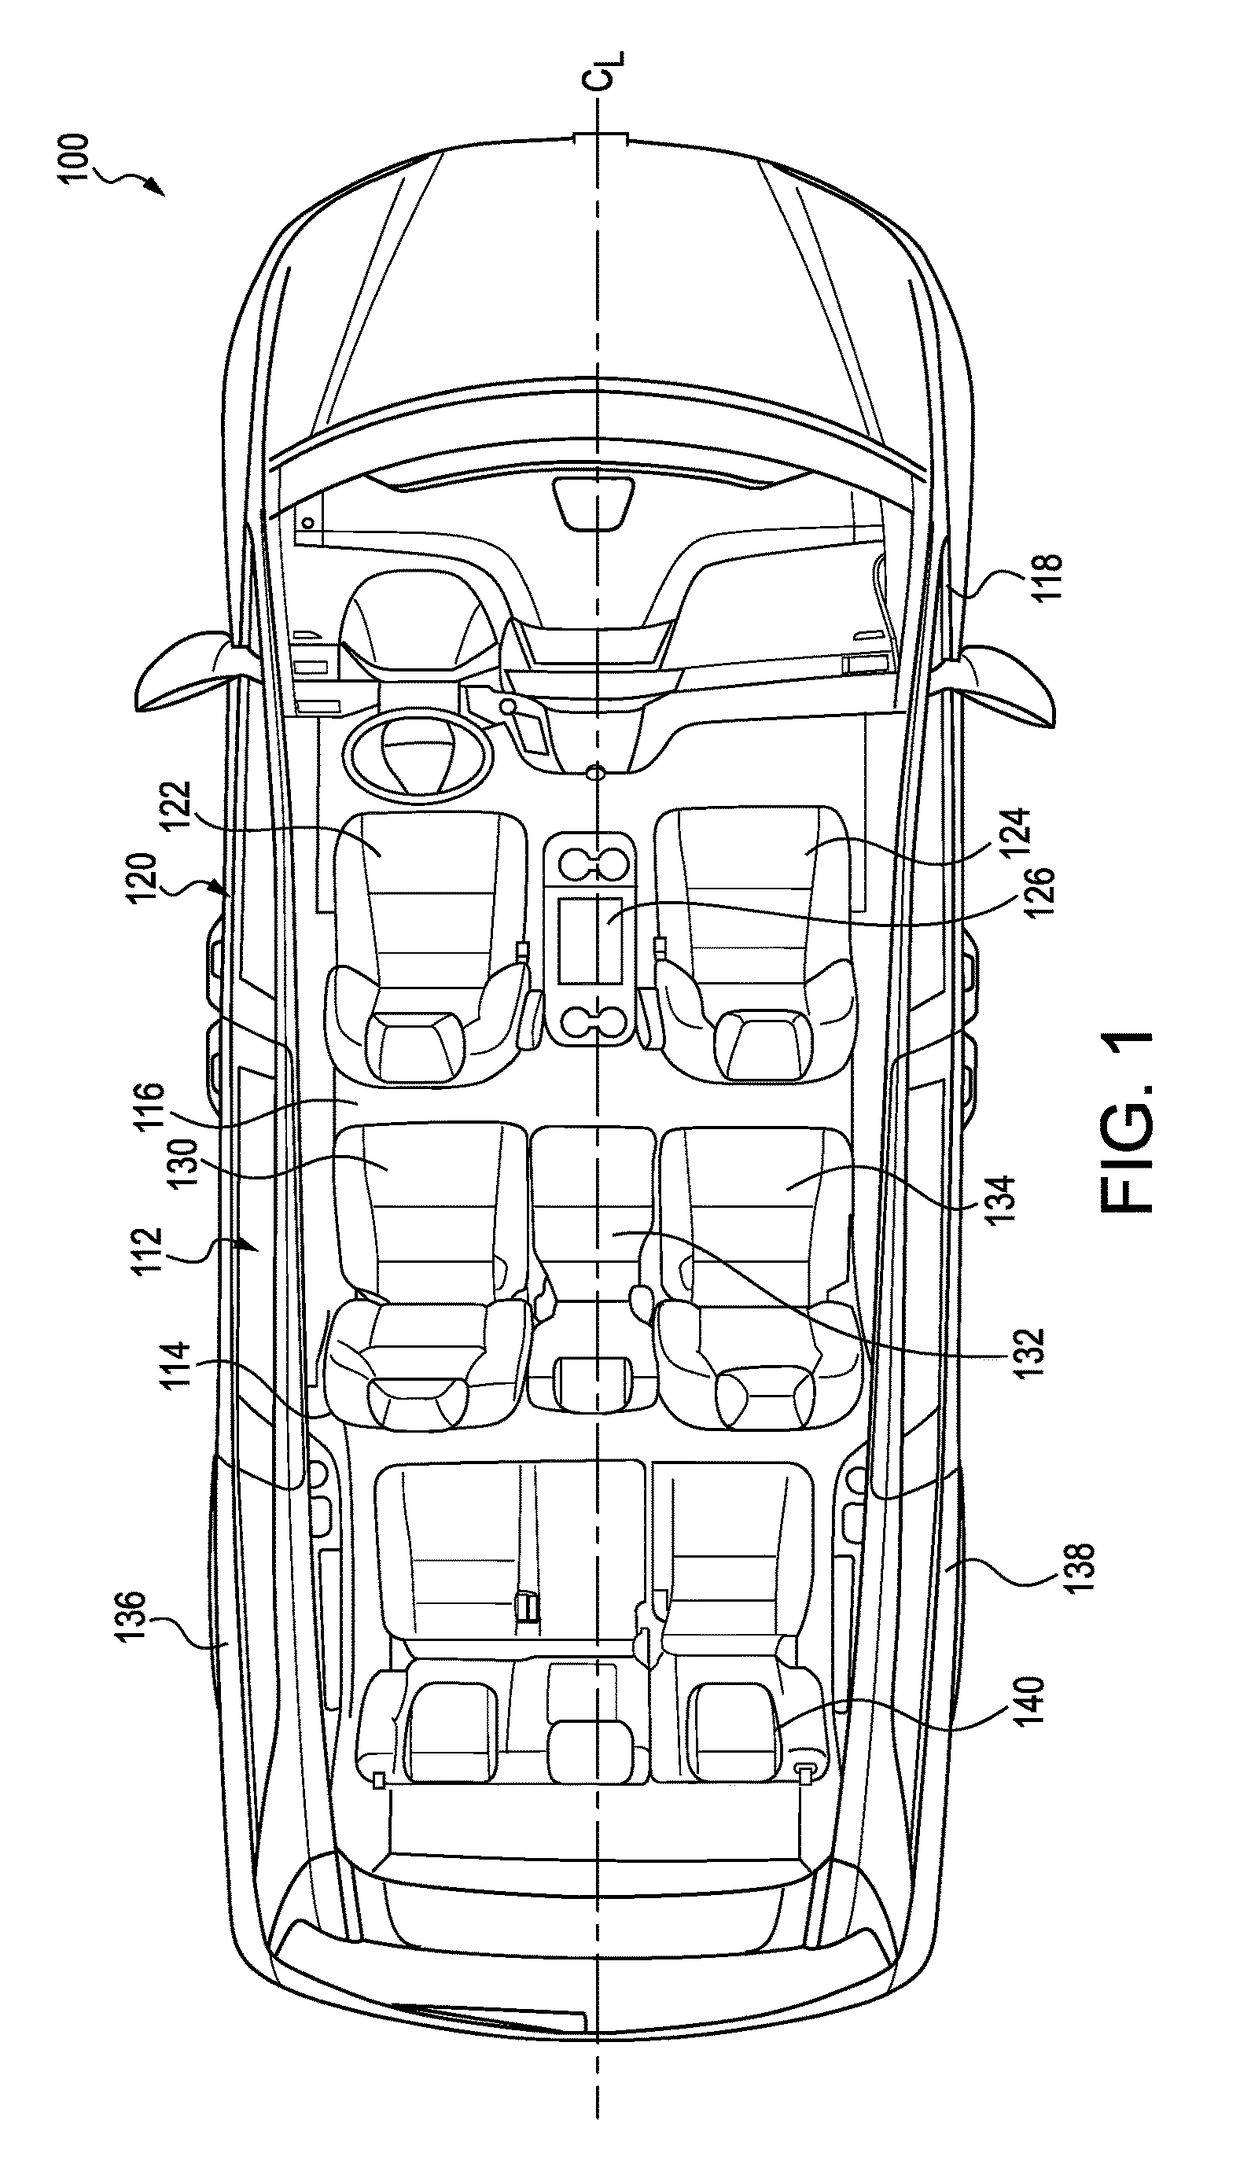 Removable seat for a motor vehicle